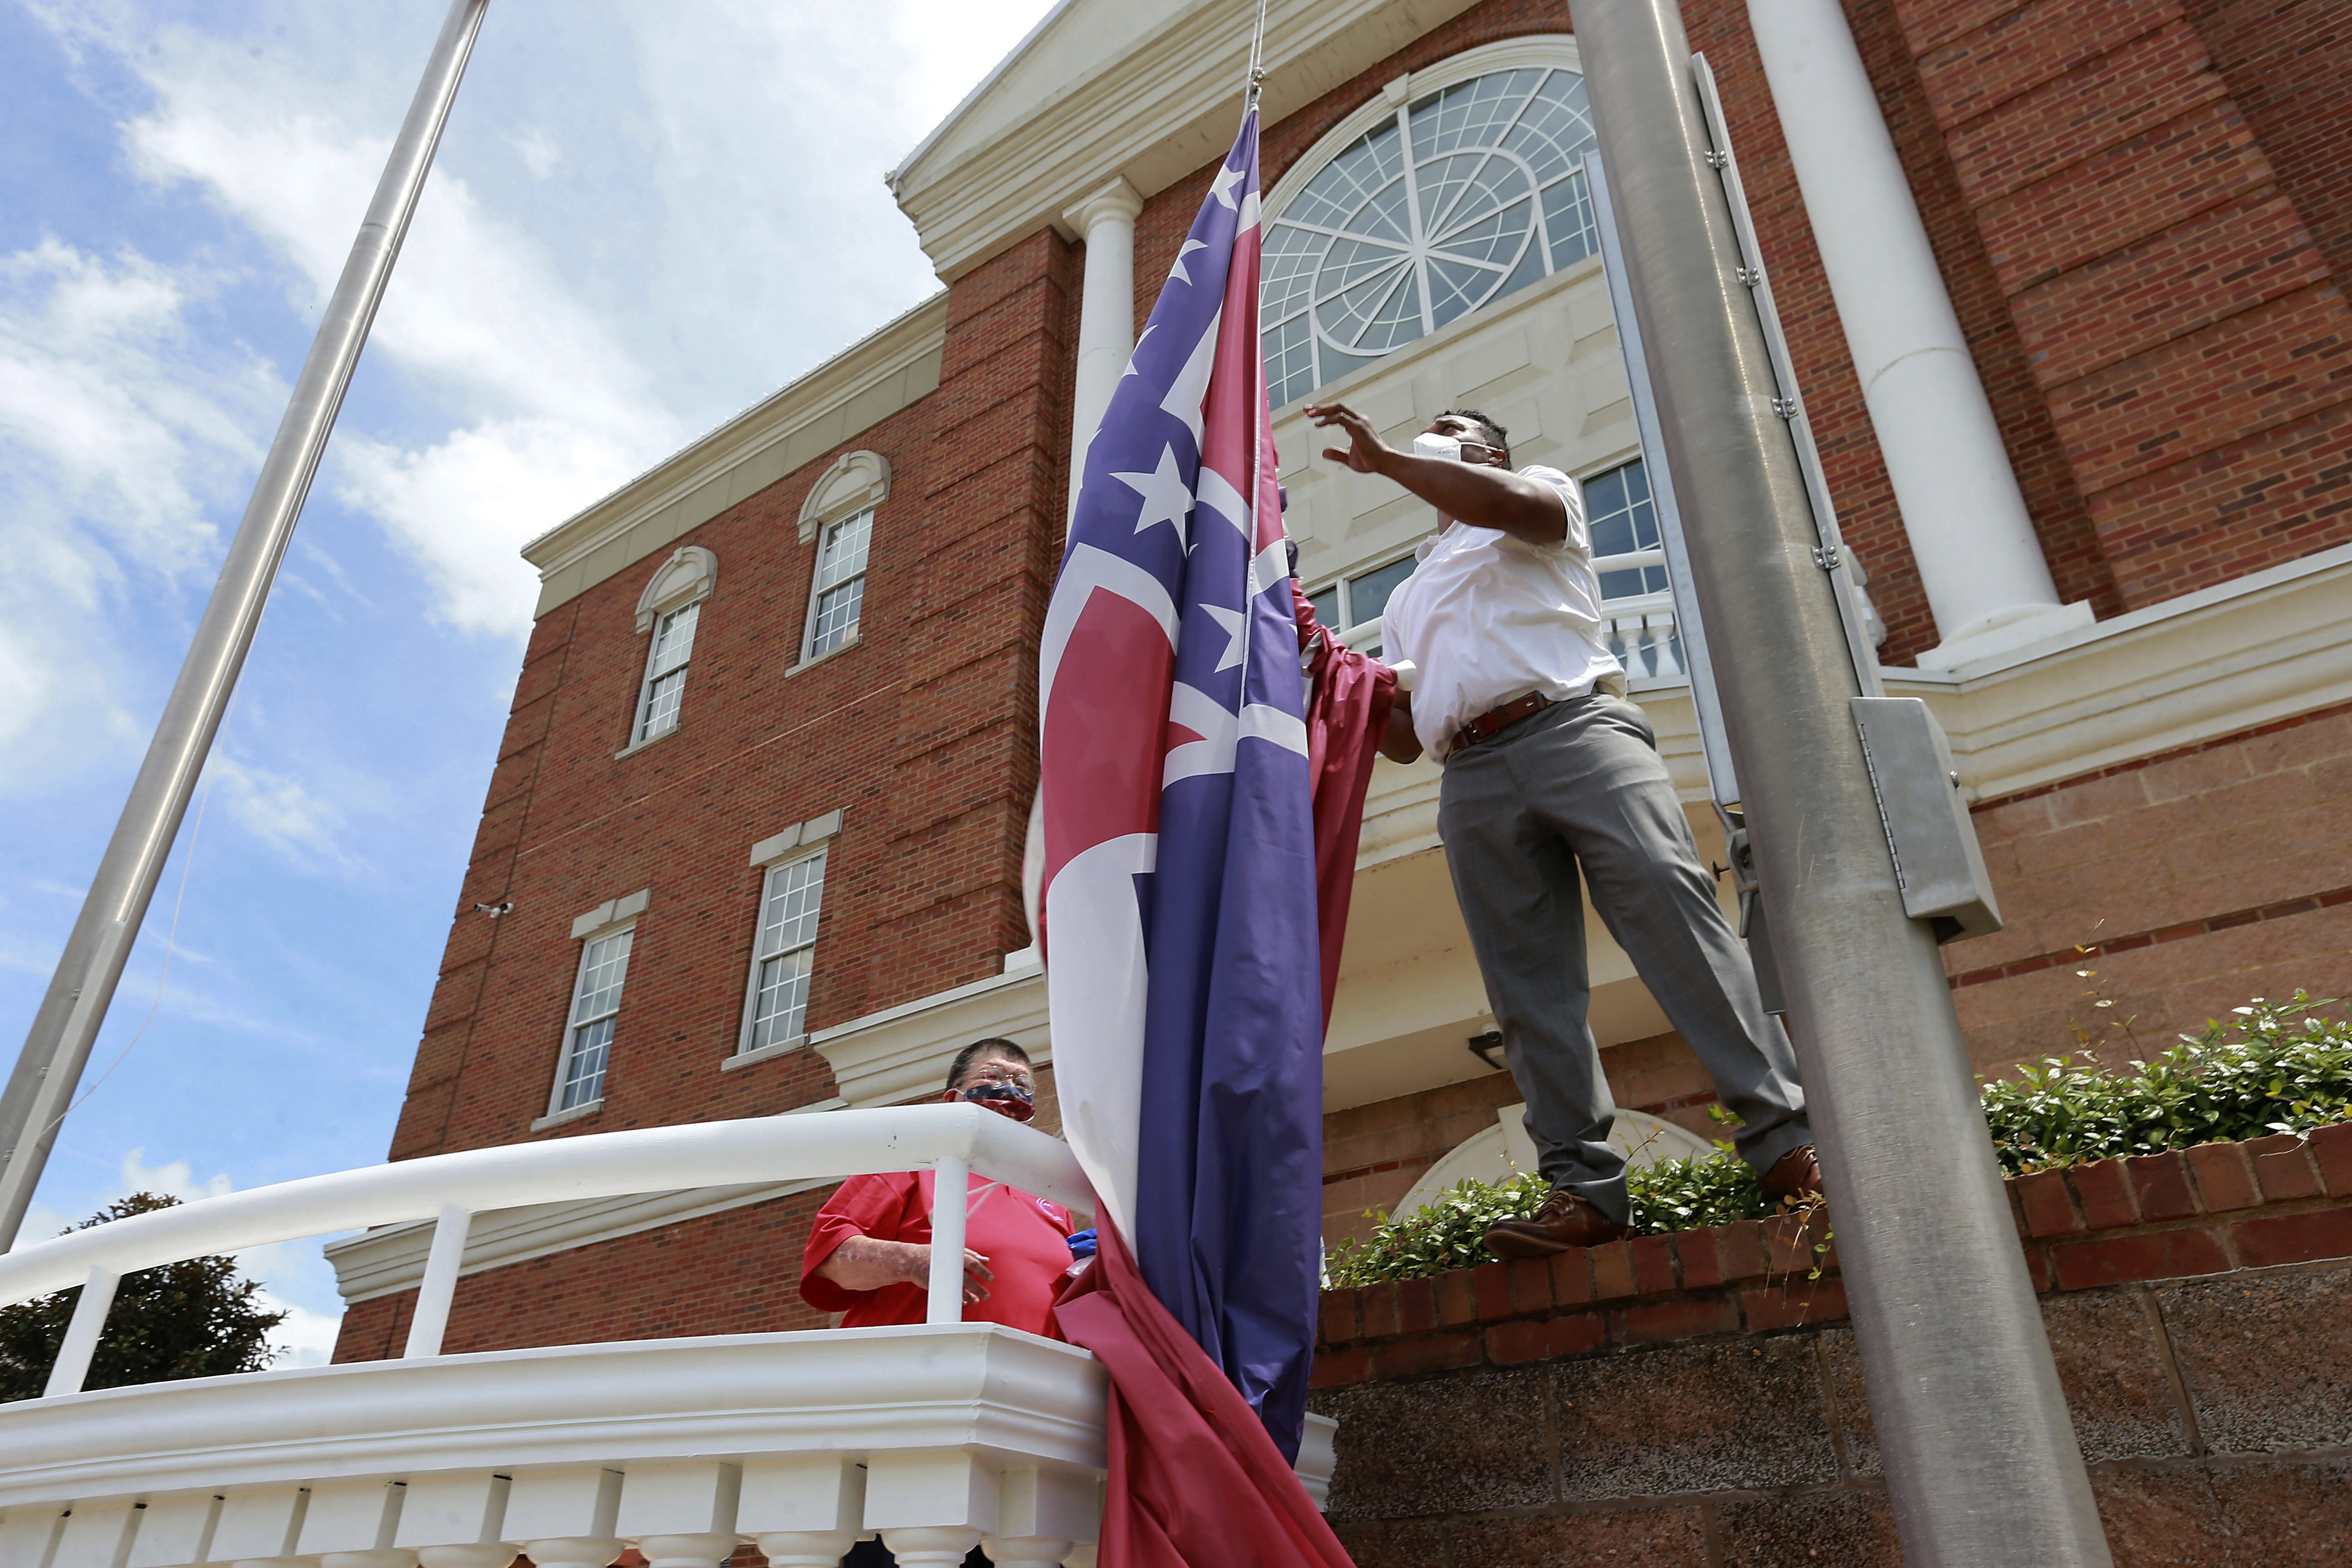 FILE - In this Monday, June 29, 2020, file photo, City of Tupelo Community Outreach Coordinator Marcus Gary takes down the Mississippi state flag that flew over the City Hall of Tupelo one last time Monday, June 29, 2020. Mississippi is retiring the last state flag in the U.S. that includes the Confederate battle emblem. Photo: AP